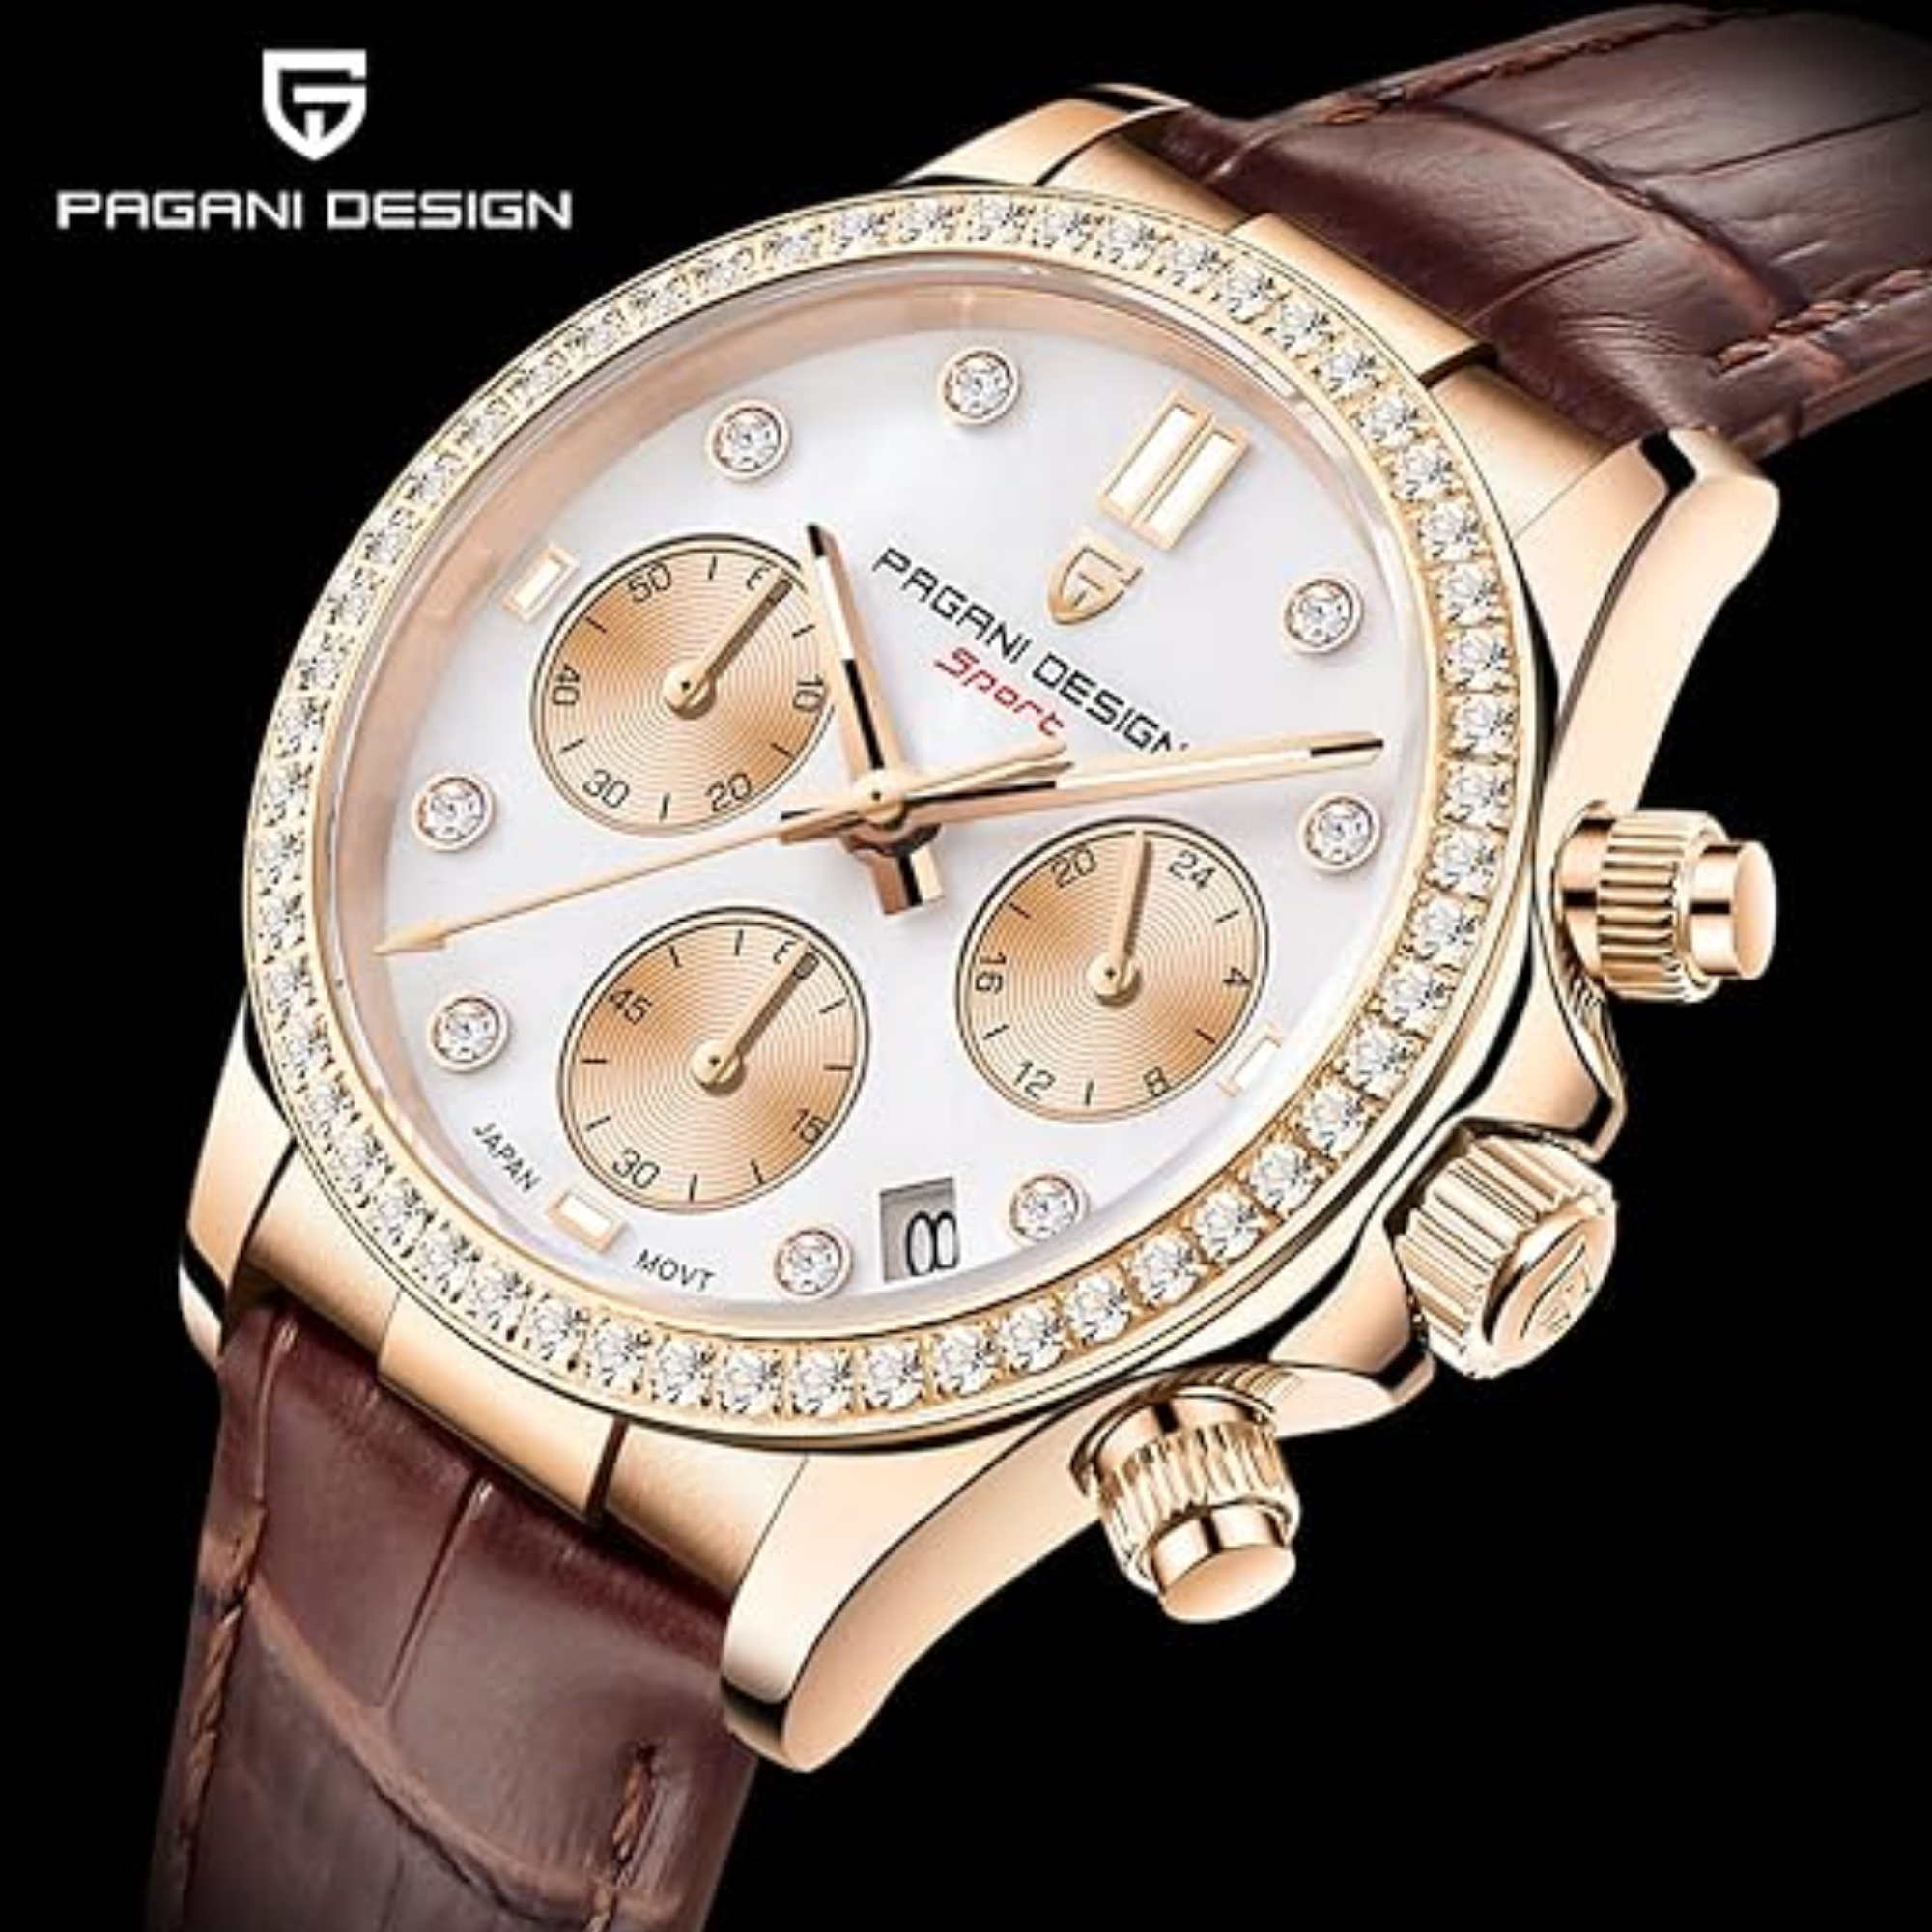 Pagani Design PD1730 Chronograph Date Quartz women's Watch  - Gold Dial with Brown Strap